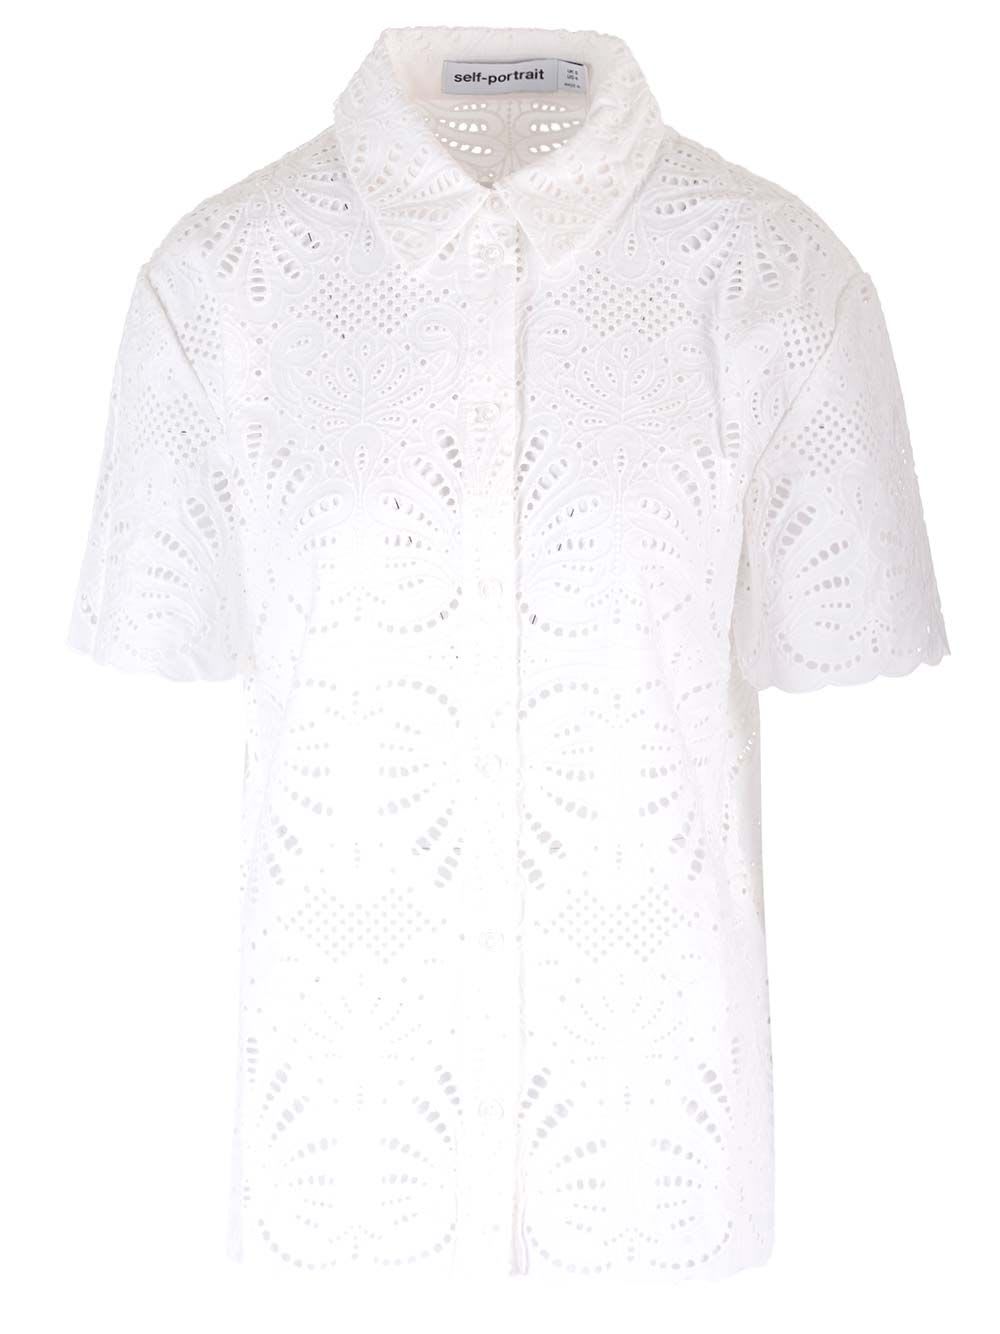 Self-portrait Embroidered Cotton Shirt In White